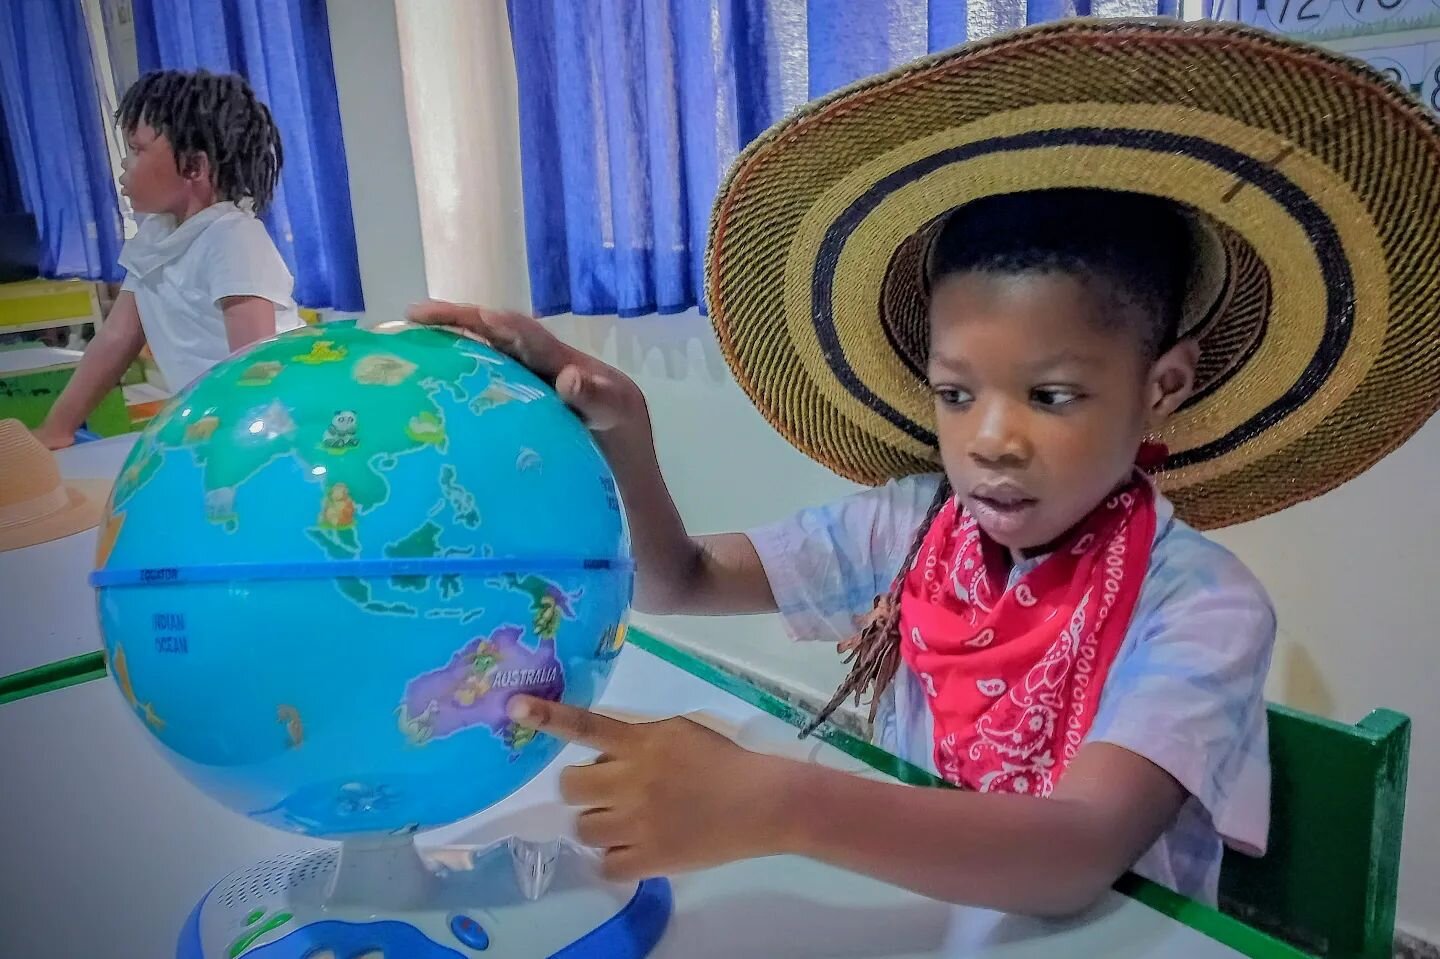 Happy Weekend! Can you guess which continent our pre-KG students were excited to learn all about here? 😃
&bull;🌍🌎🌏&bull;
Our young world explorer got to spin the globe around and confidently point to this far continent &quot;down under&quot; ;) a